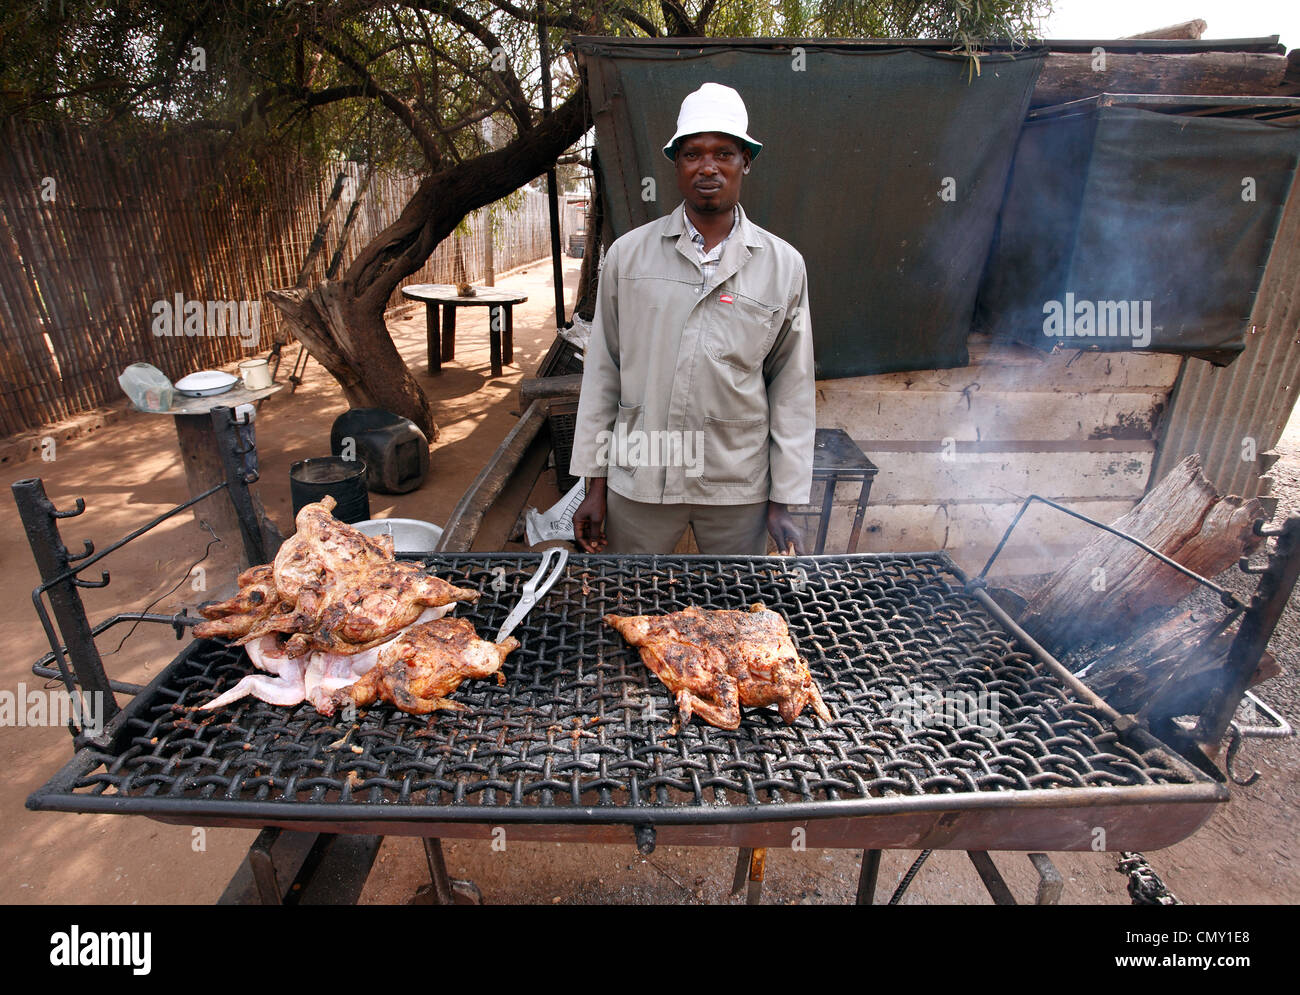 Man is selling a roast chicken on the street in a small town in RSA. Stock Photo